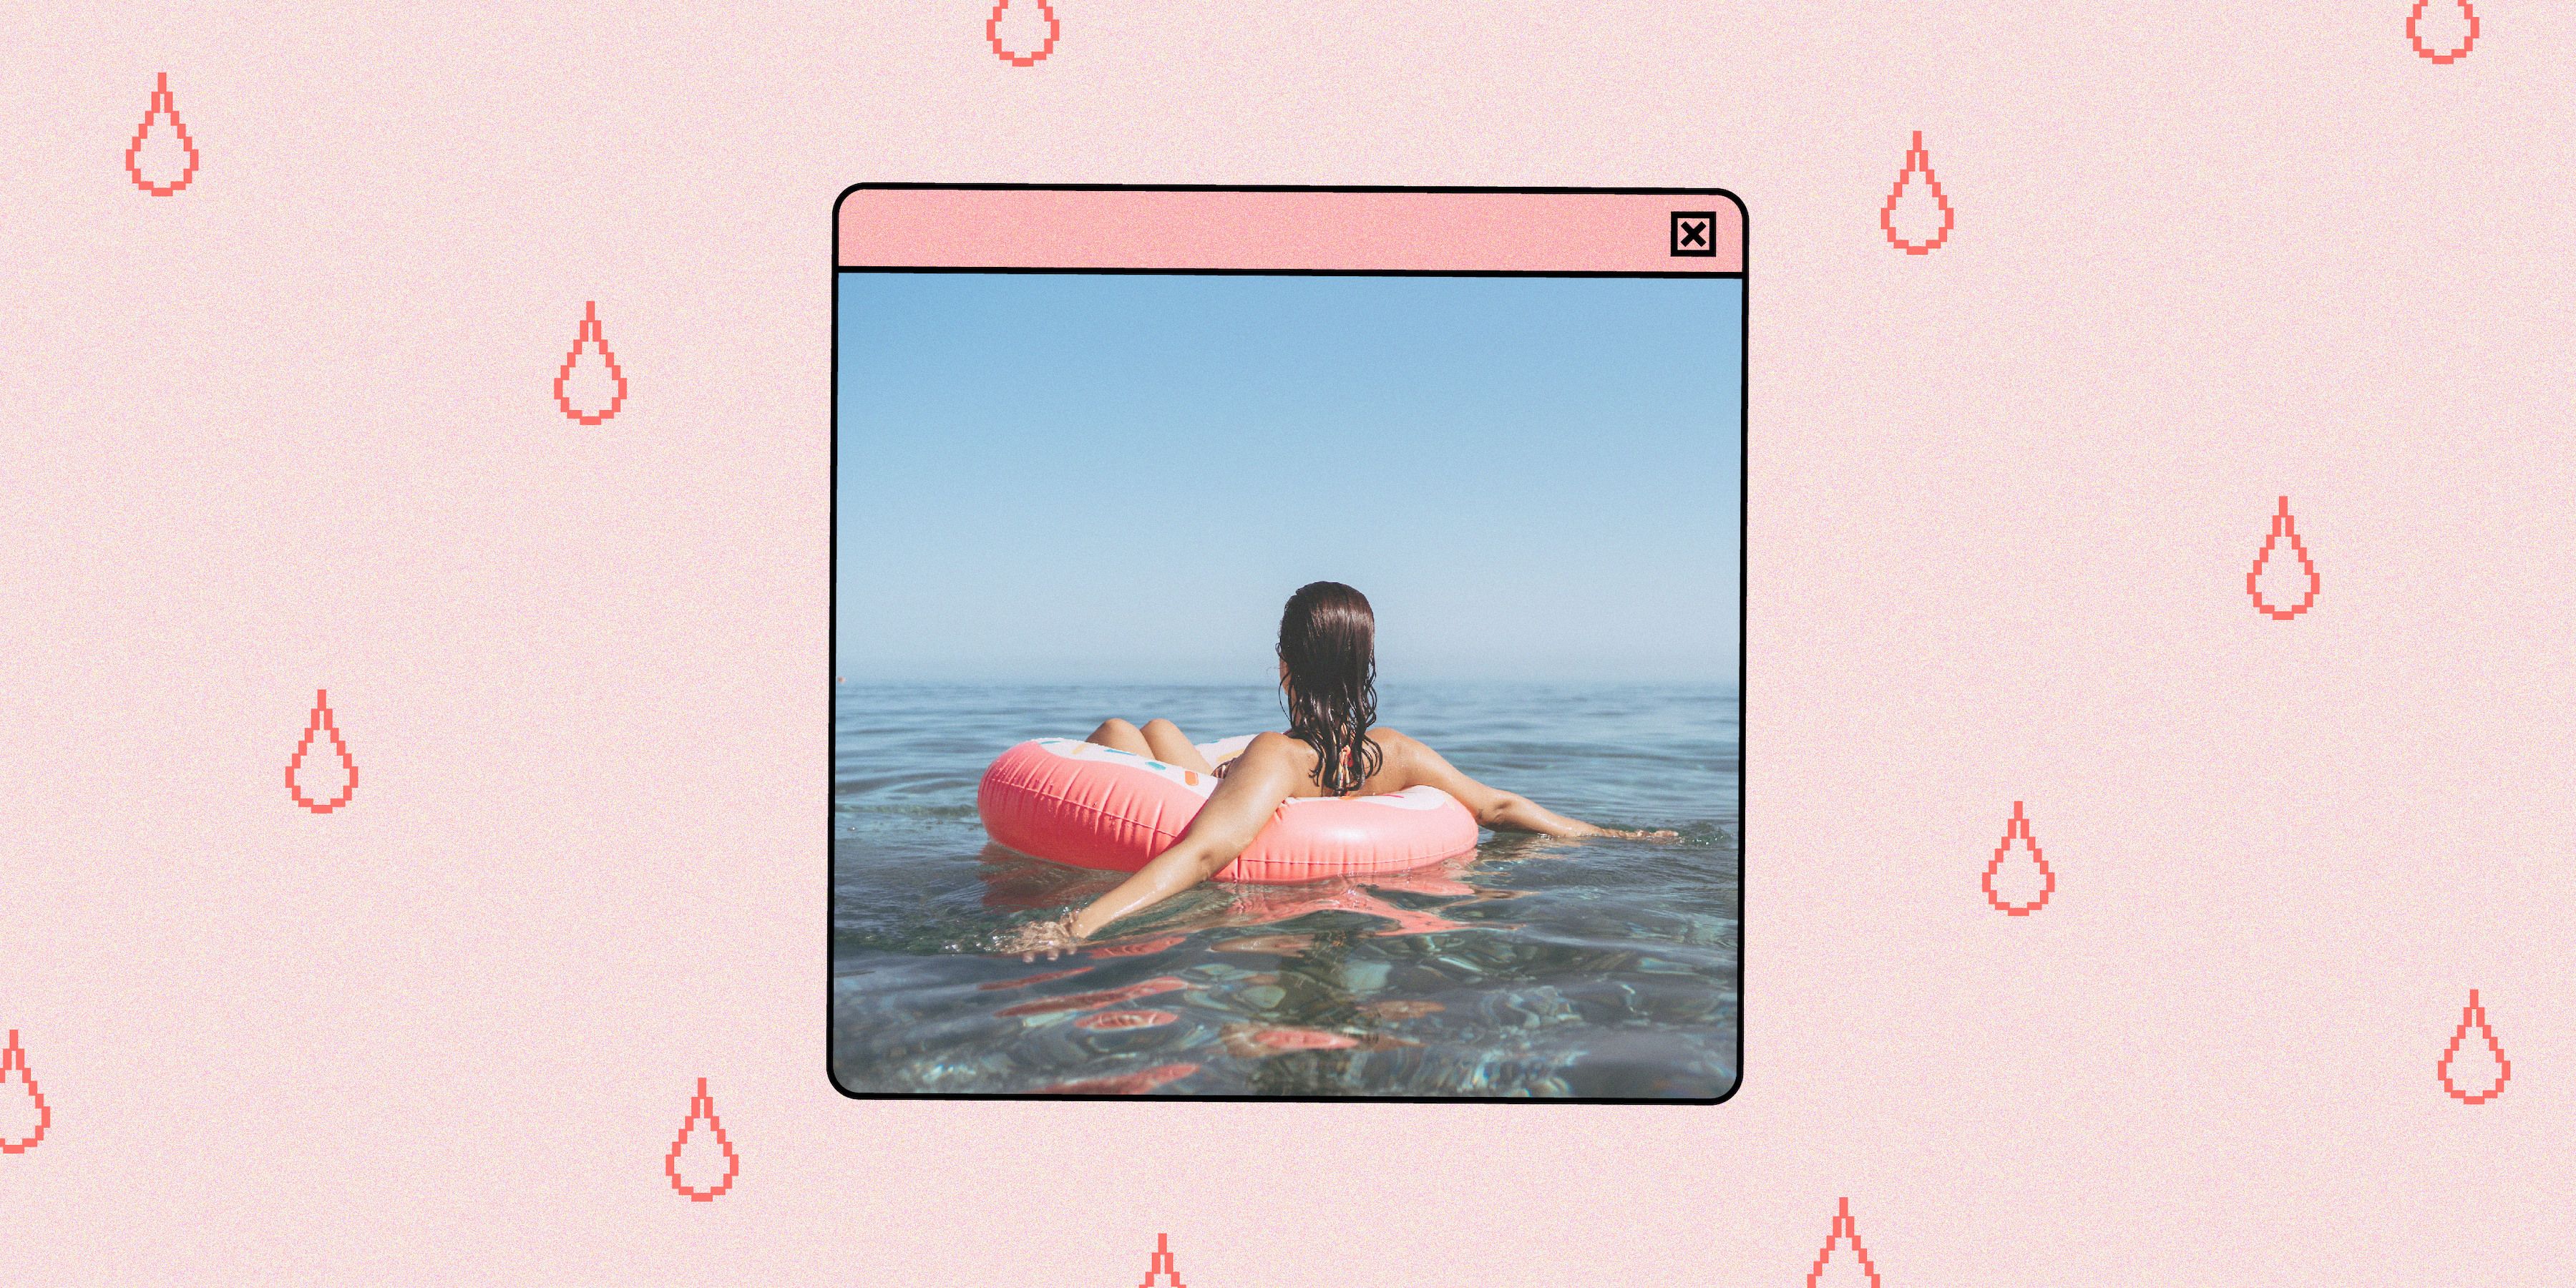 Can You Swim on Your Period Without a Tampon?